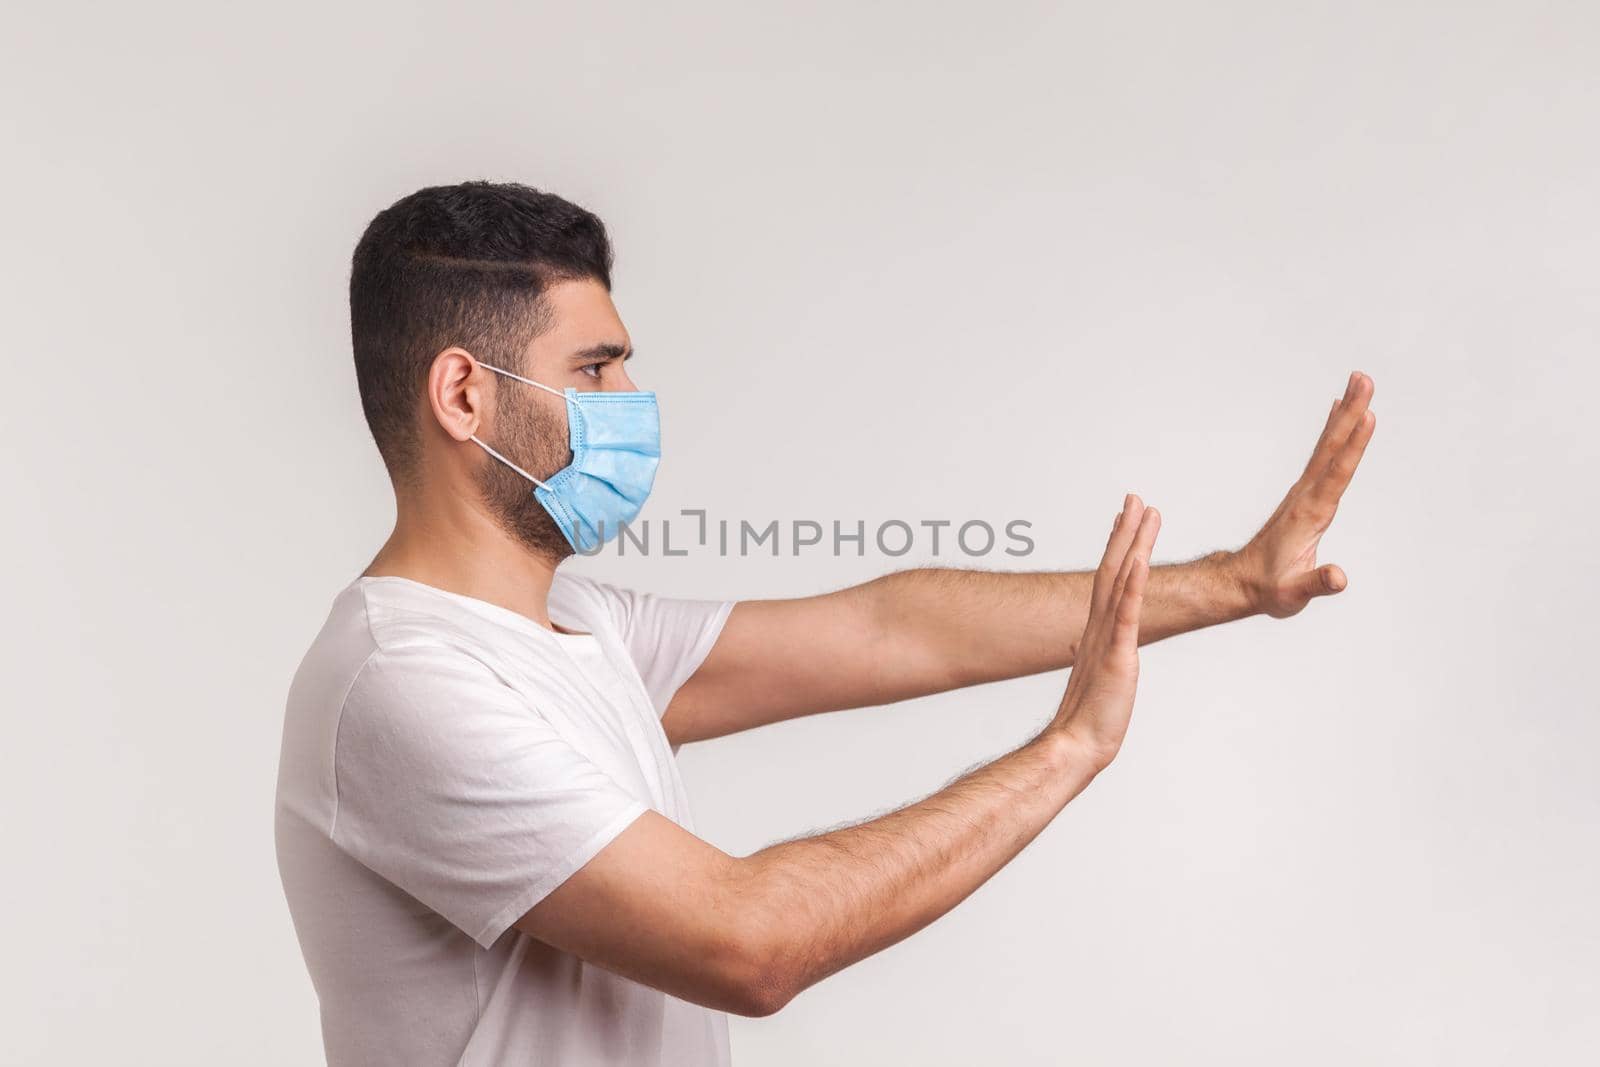 Side view of alarming man in hygienic protective mask gesturing stop, afraid of coronavirus infection, respiratory illnesses such as flu, 2019-nCoV. indoor studio shot isolated on white background